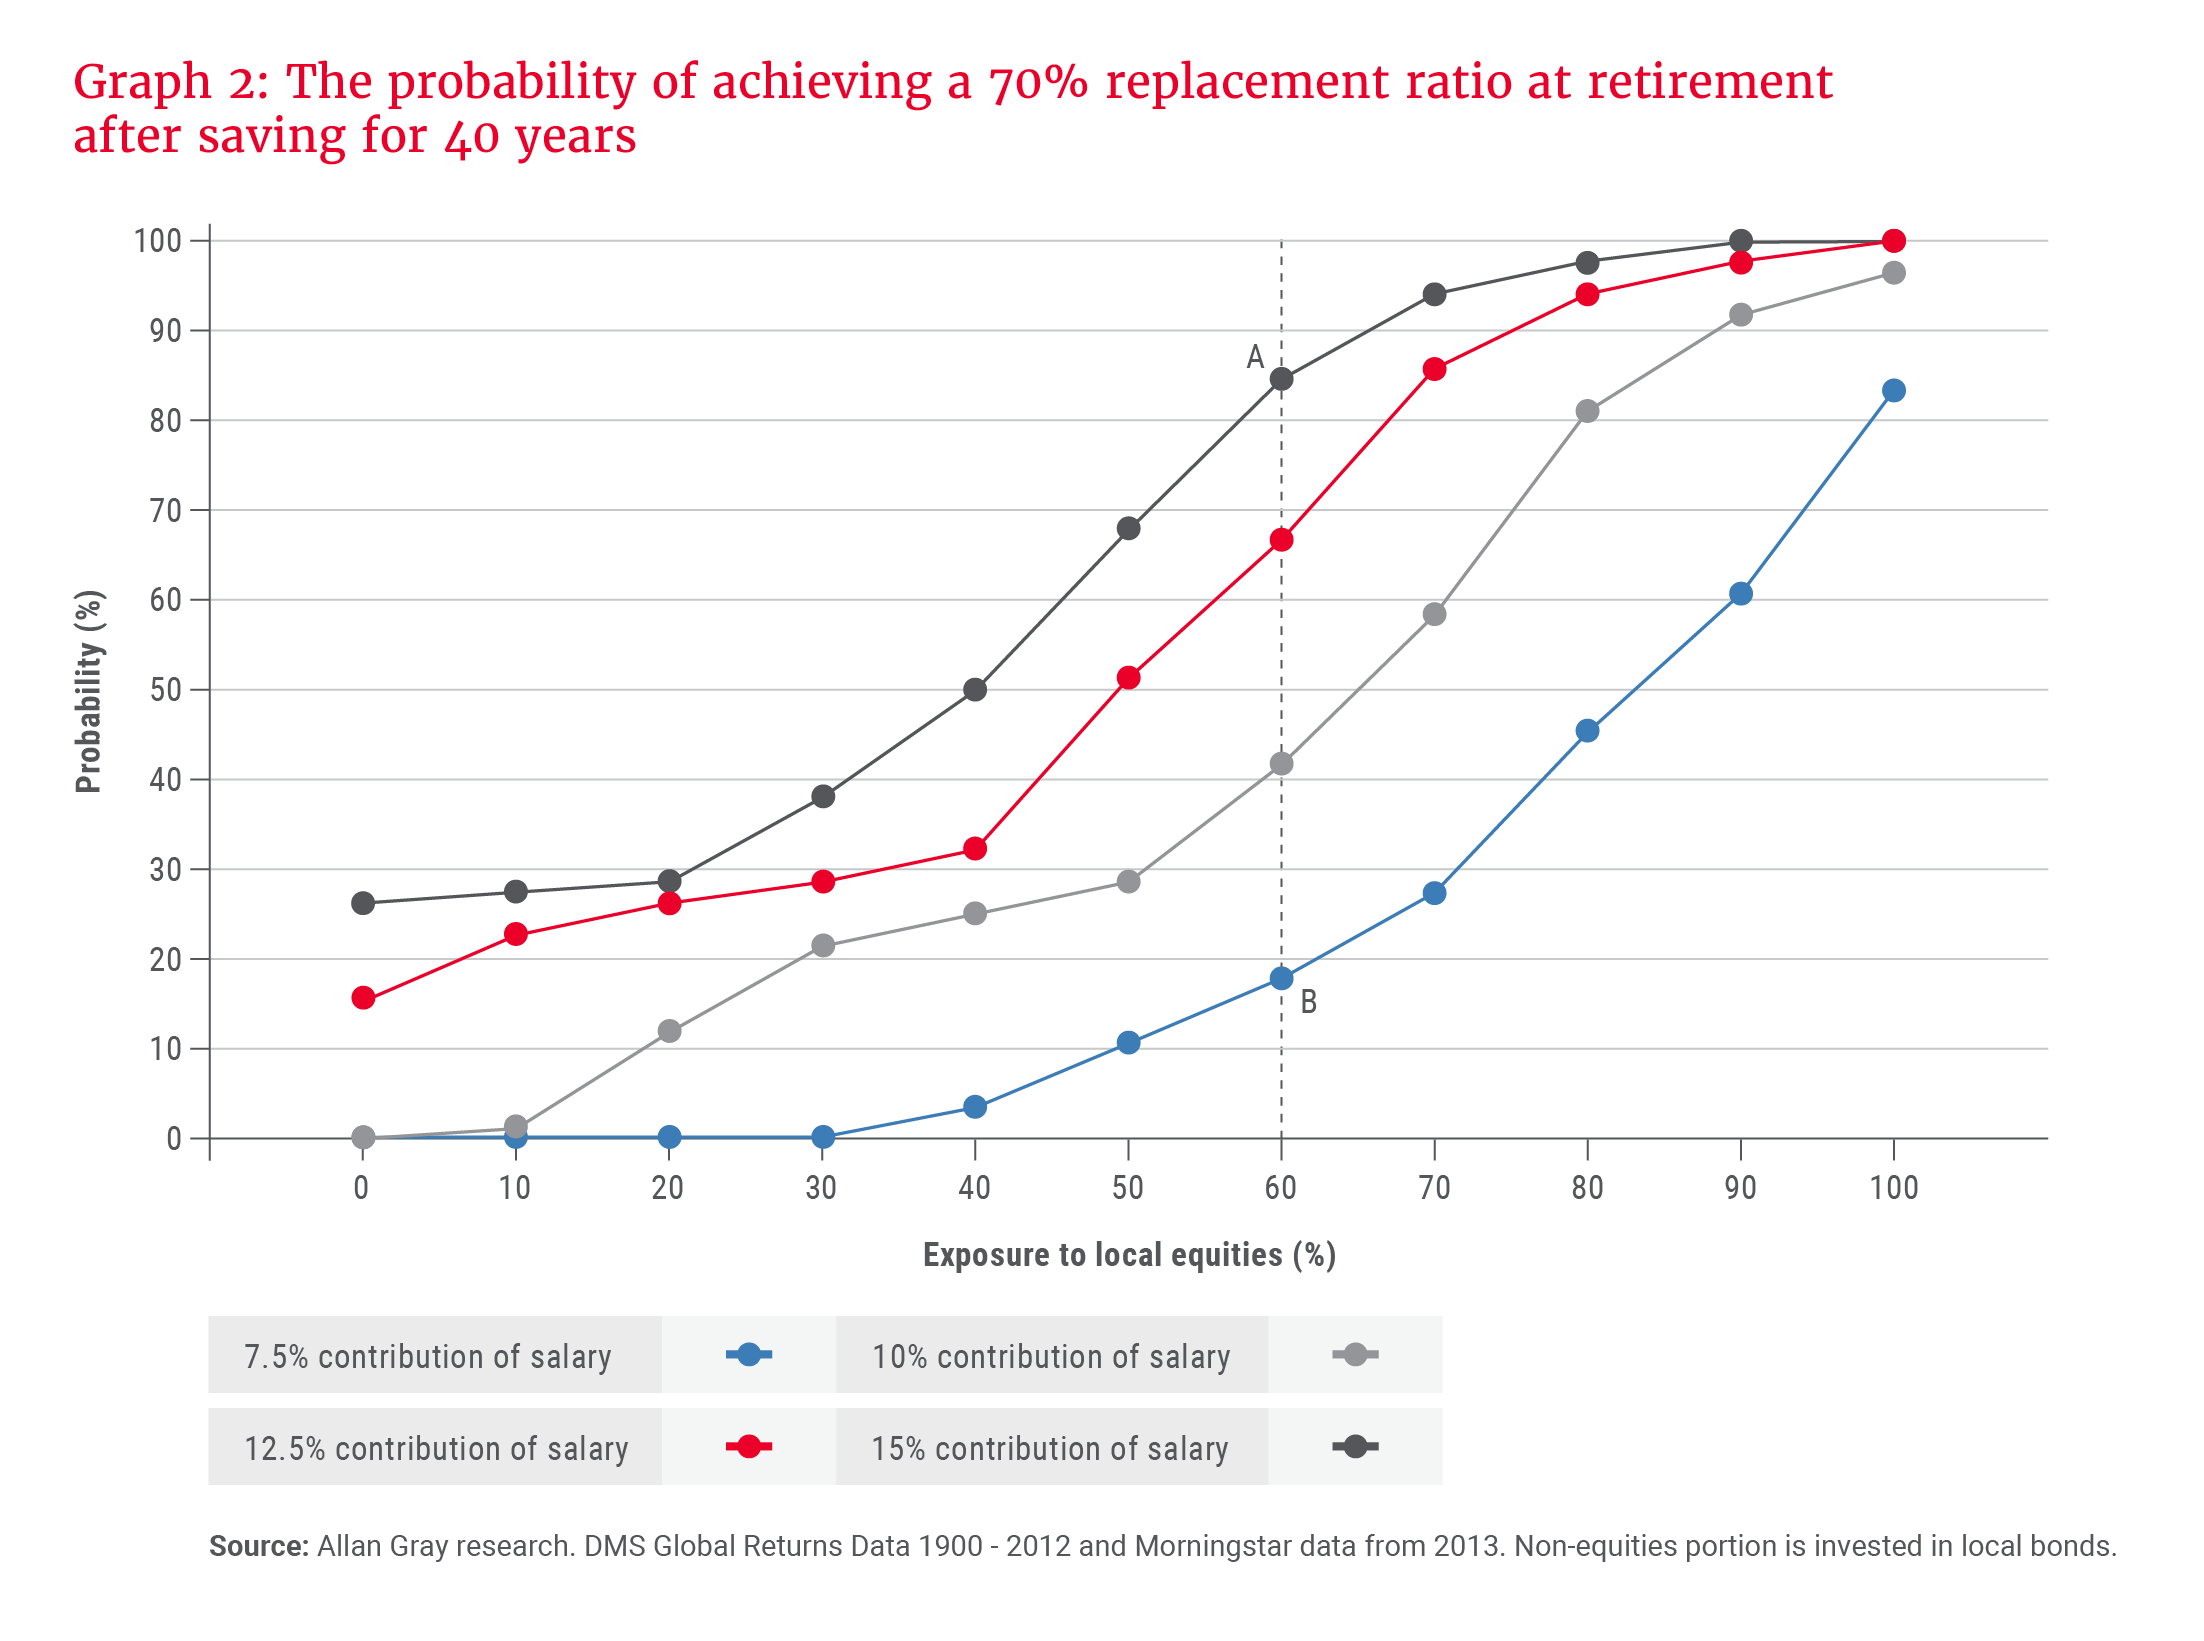 The probability of achieving a 70% replacement ratio at retirement after saving for 40 years